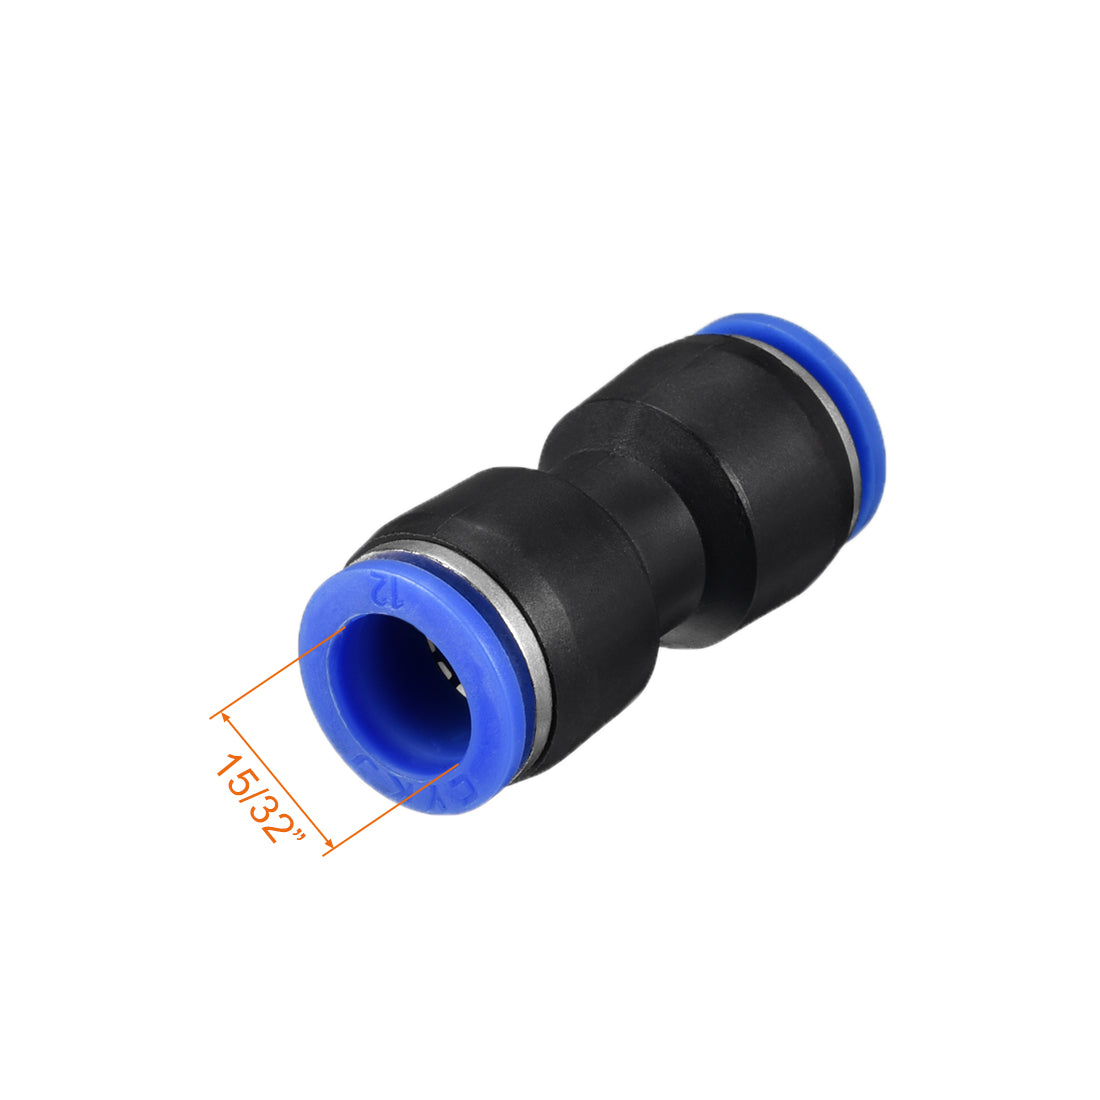 Uxcell Uxcell 4pcs Push to Connect Fittings Tube Connect  16mm or 5/8" Straight OD Push Fit Fittings Tube Fittings Push Lock Blue